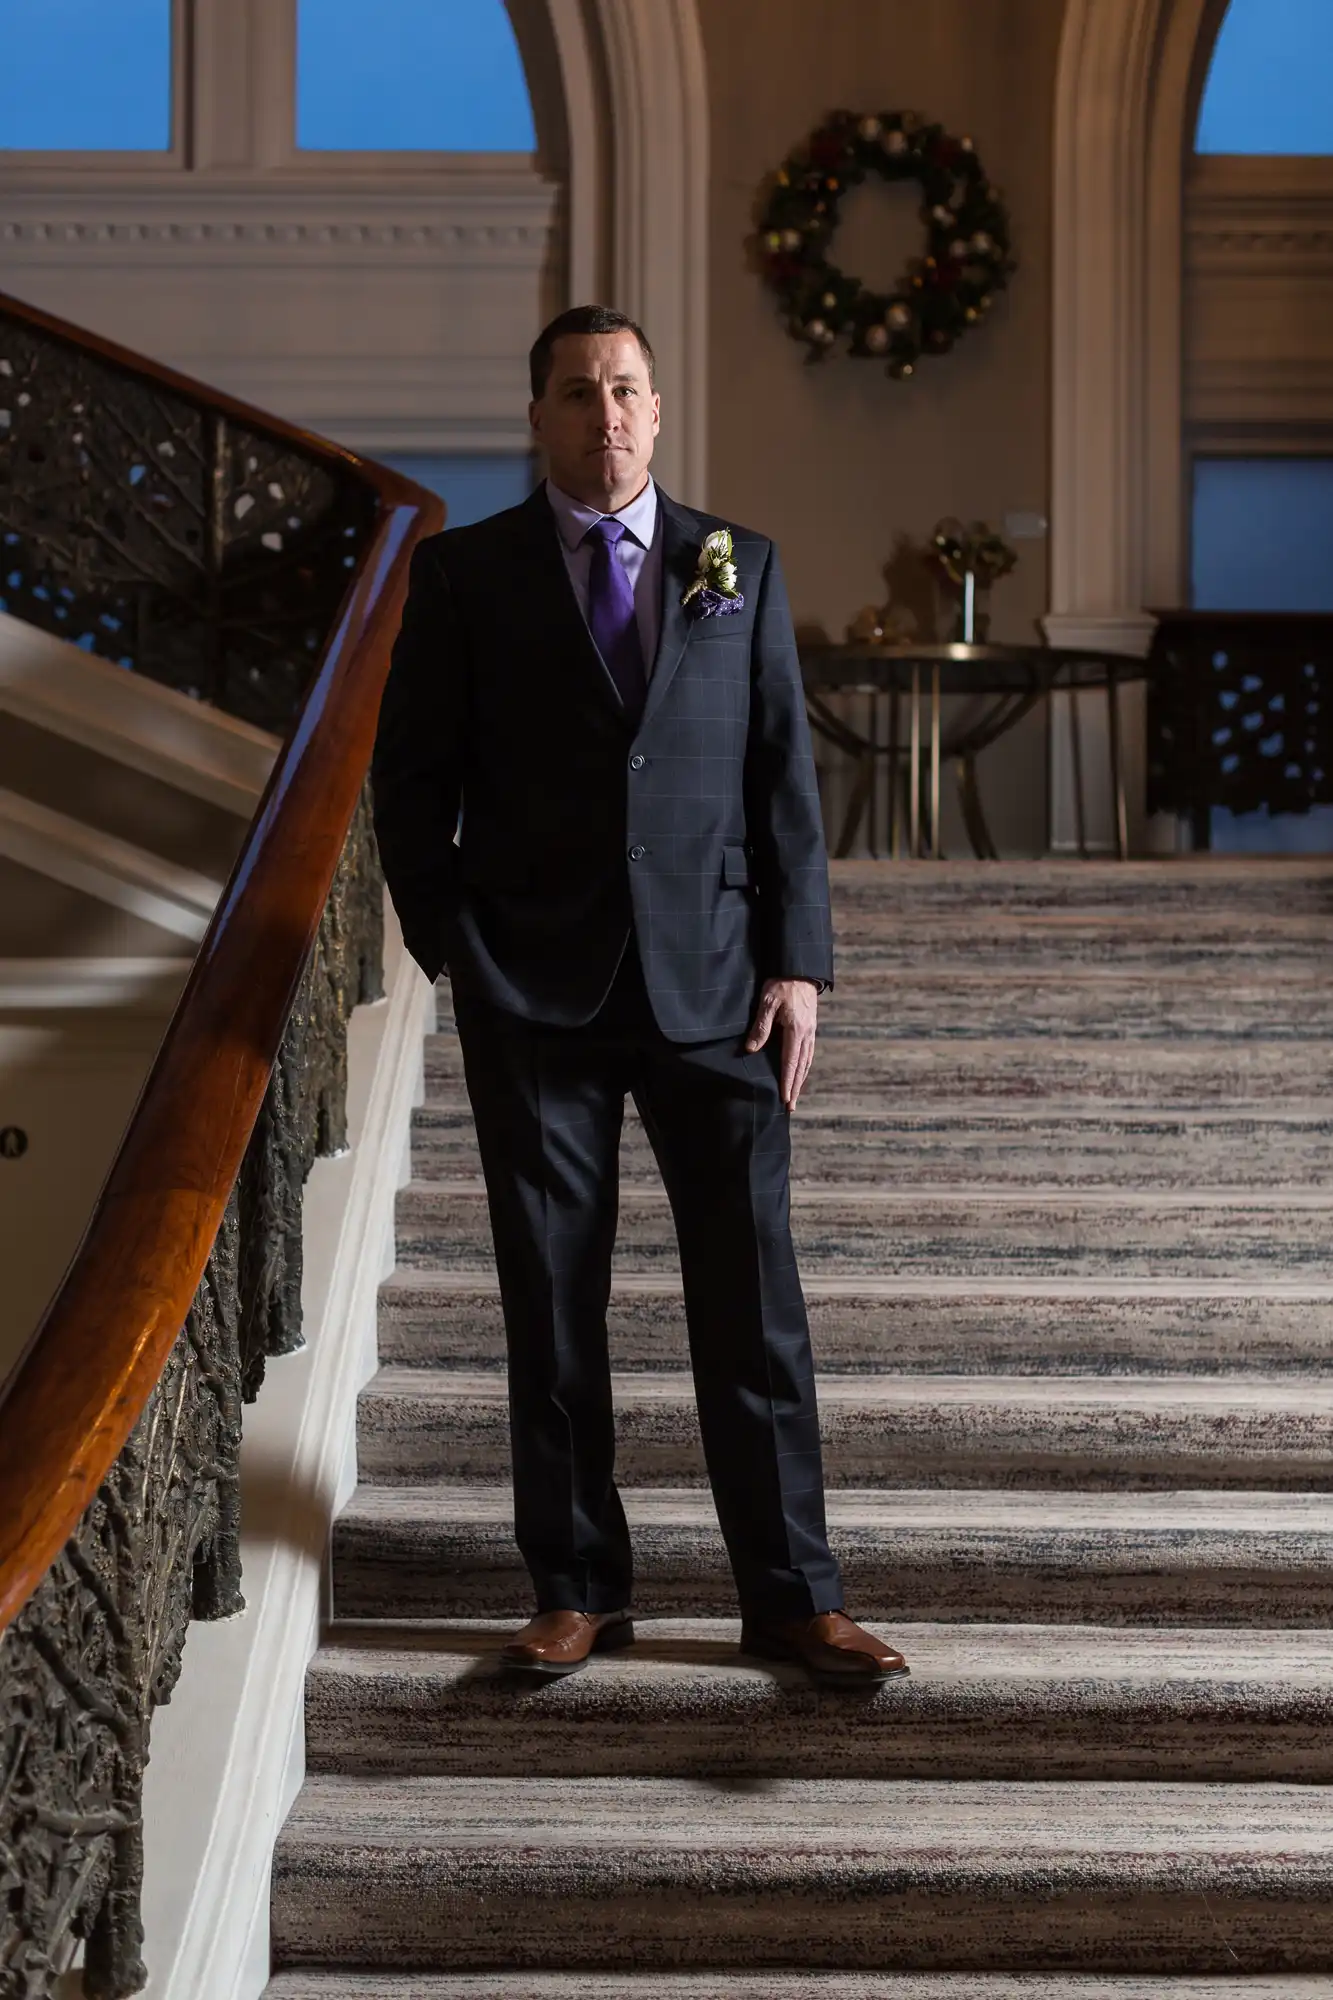 A man in a dark suit and purple tie stands solemnly on a grand staircase with a decorated wreath in the background.